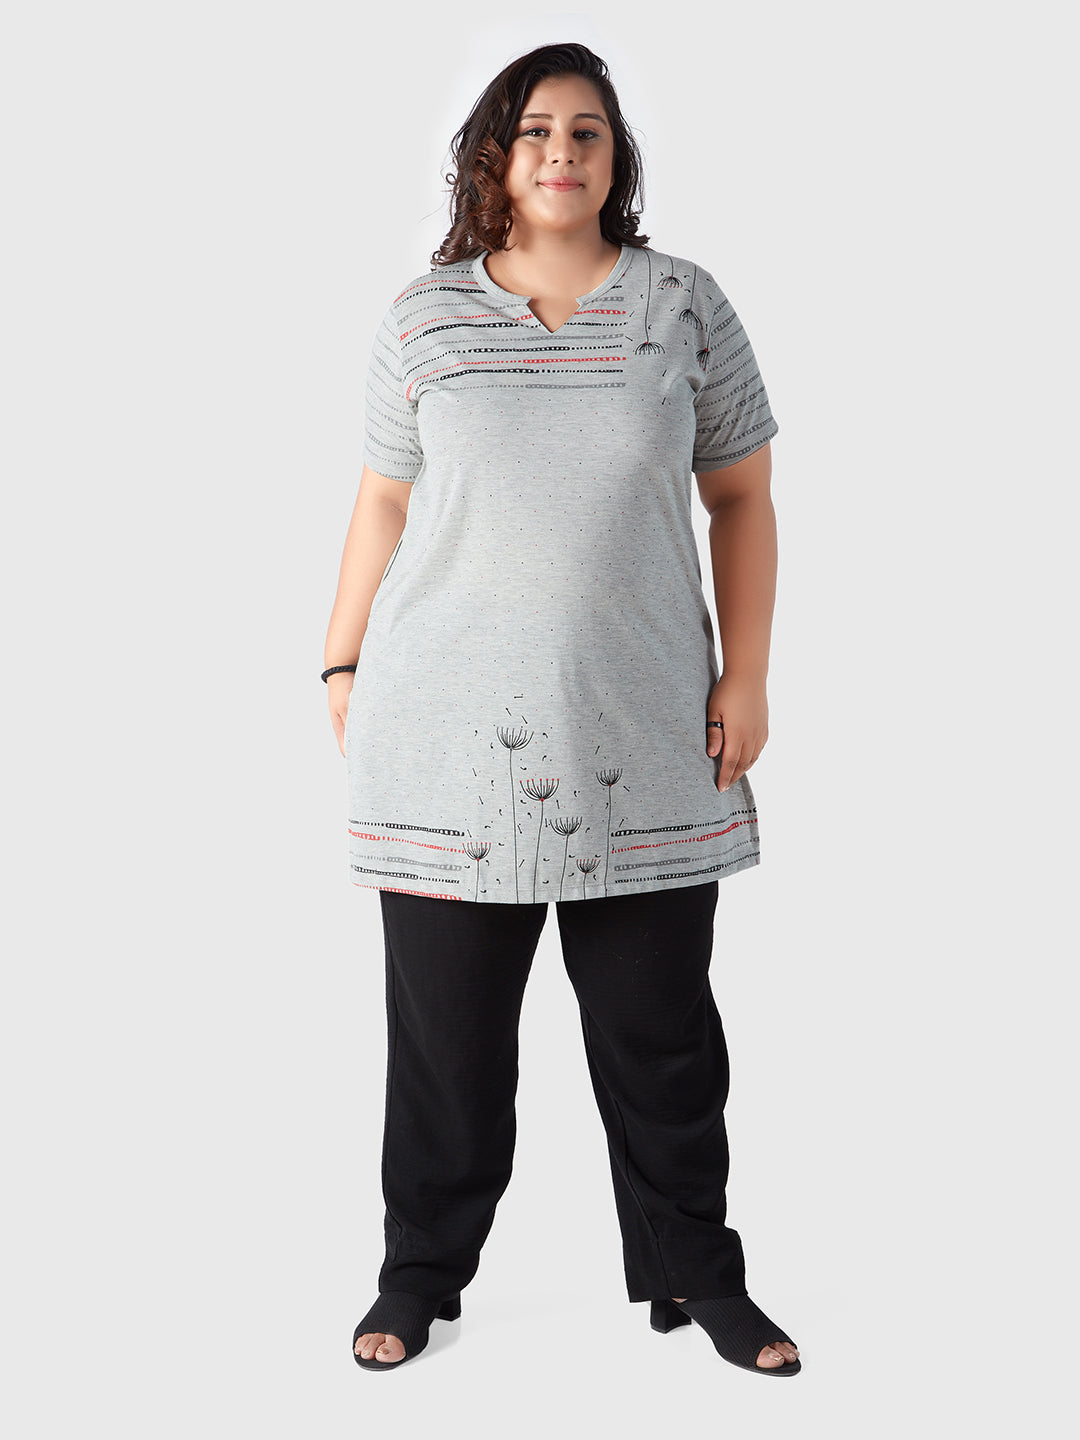 Stylish Plus Size Printed Long Tops For Women In Half Sleeves- Grey